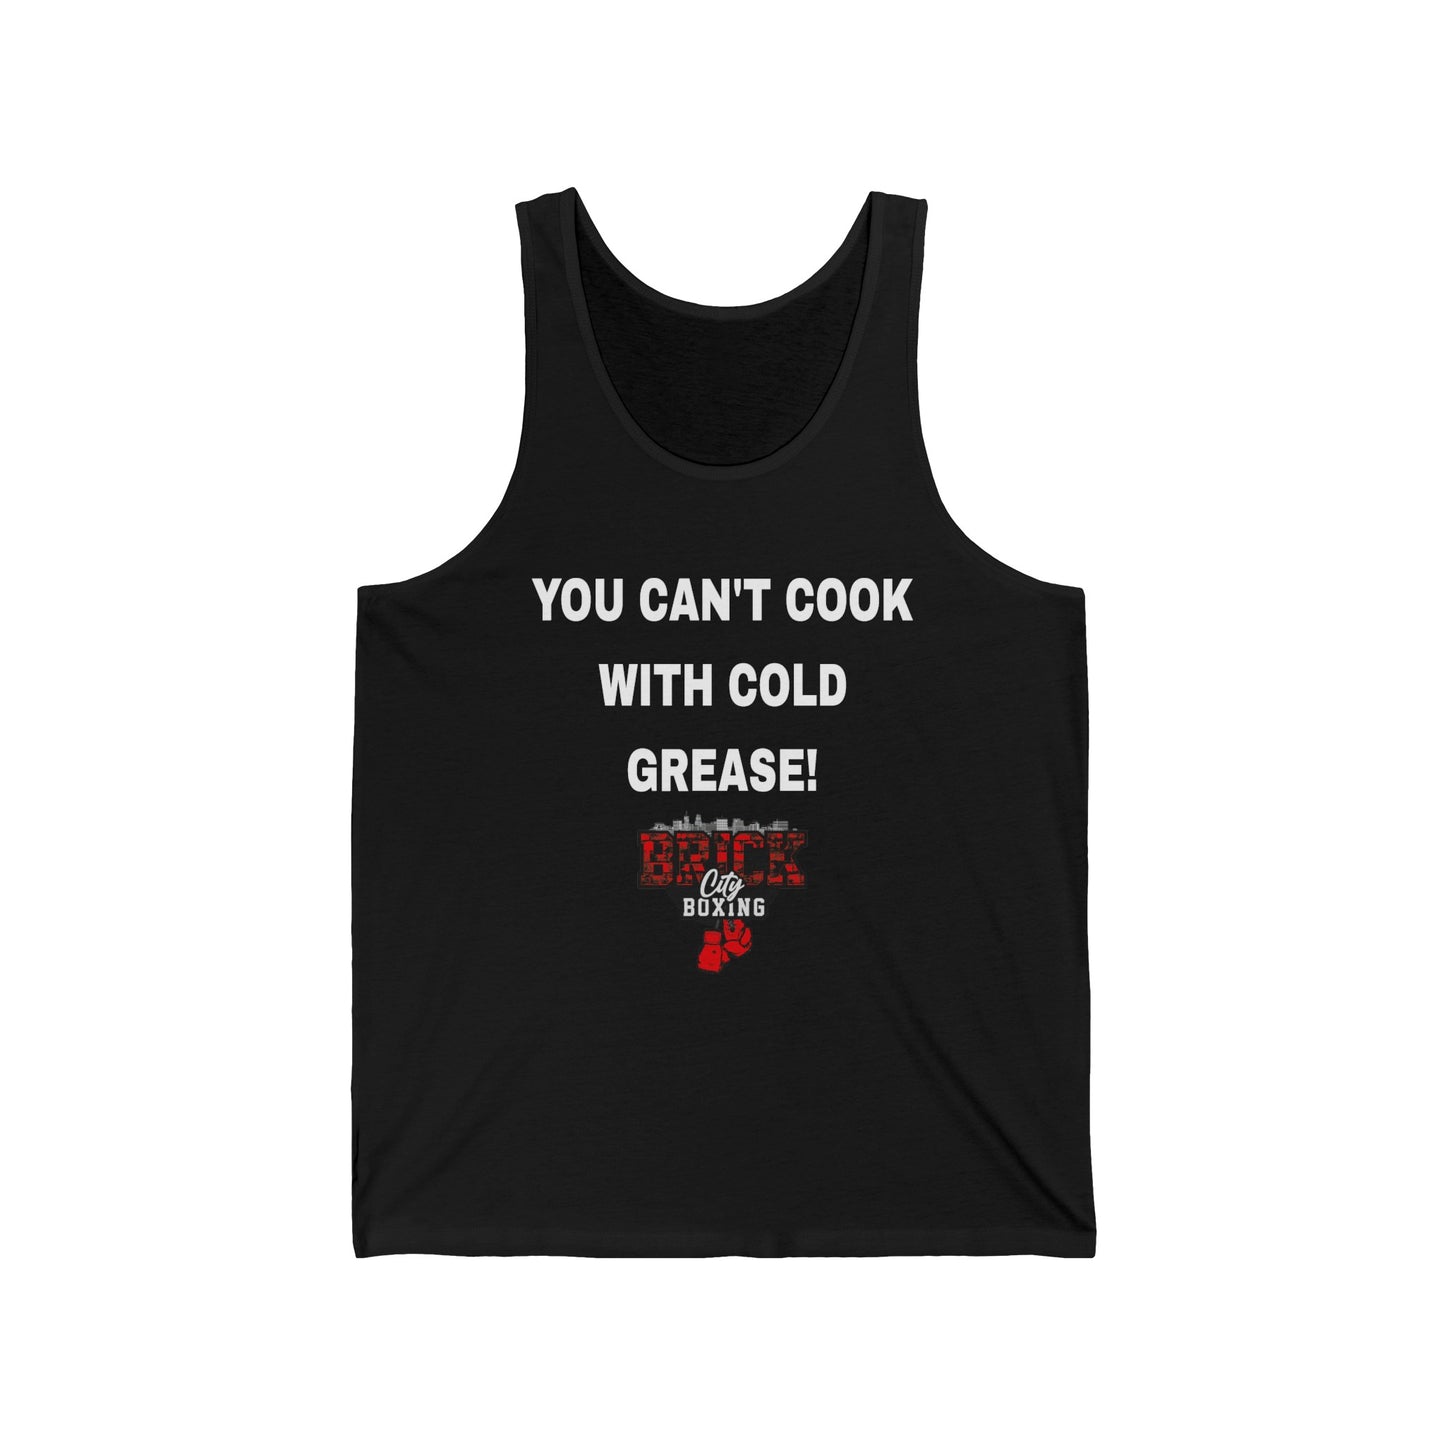 "Cold Grease" Tank